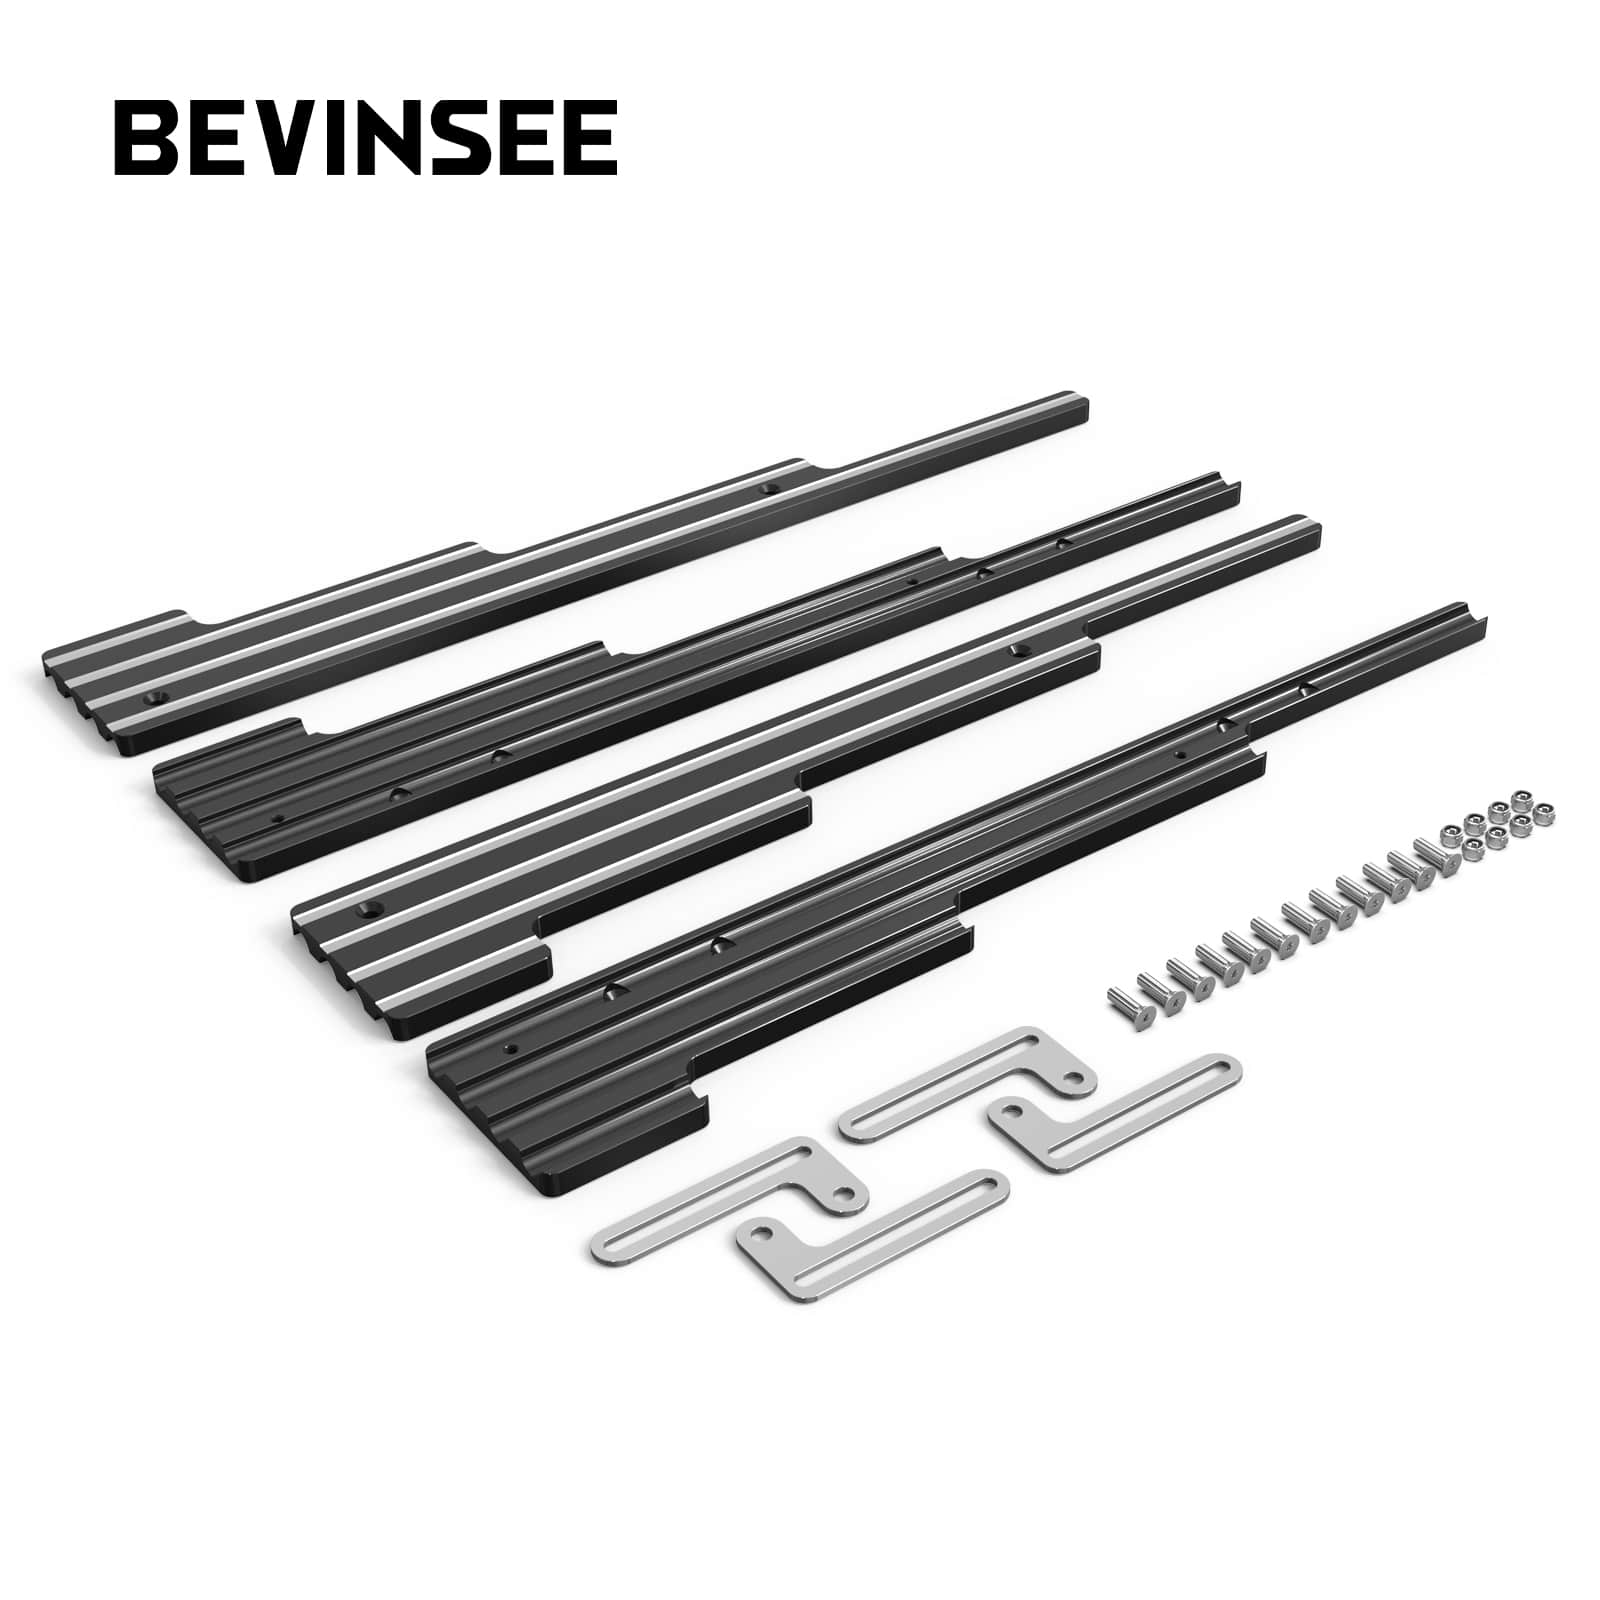 BEVINSEE SBC CNC Billet Aluminum Retro Fin Spark Plug Wire Looms Holders Small Block Chevy